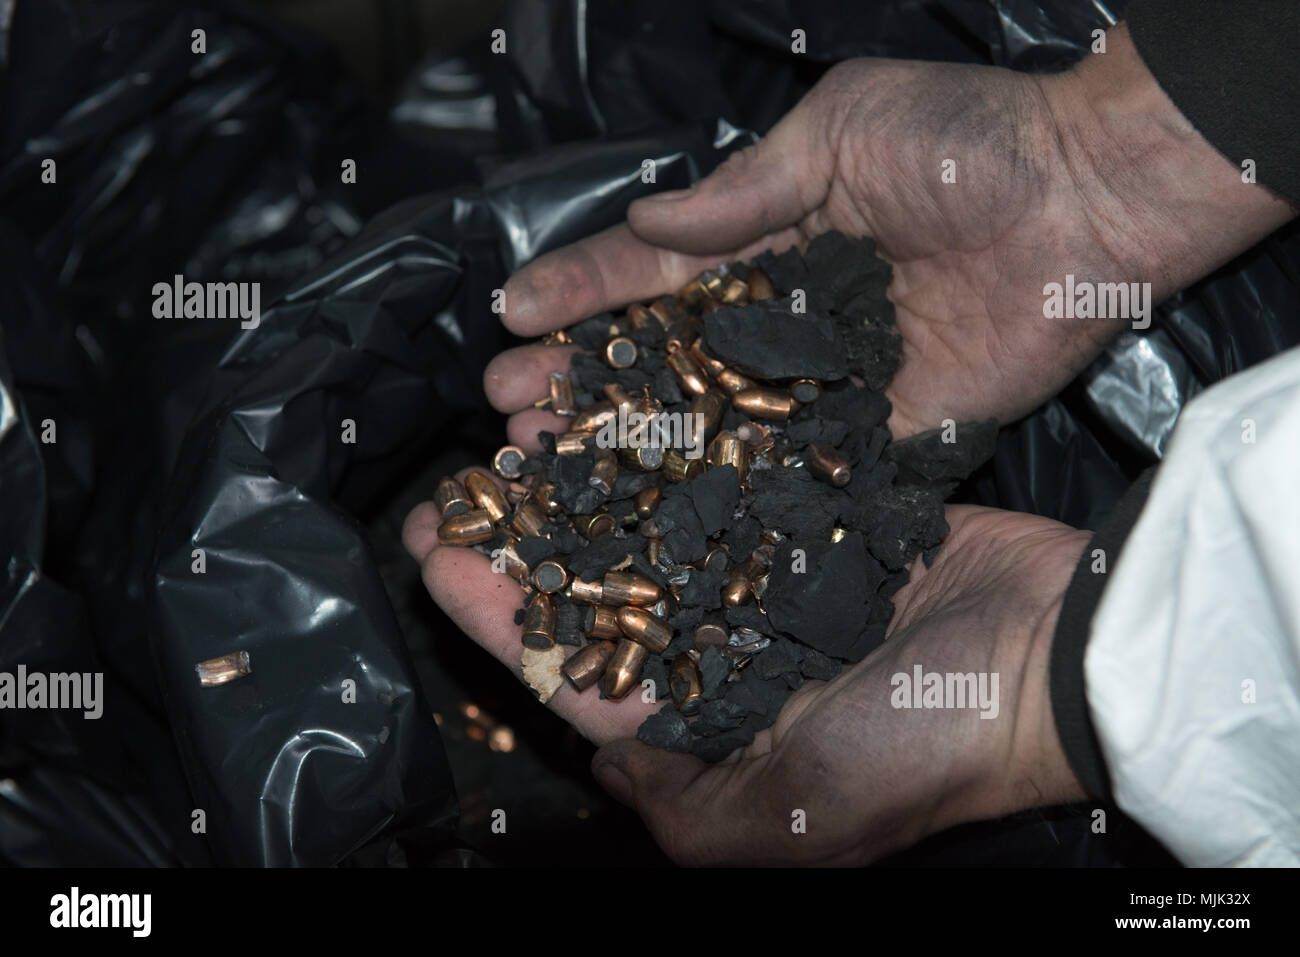 A contractor shows the bullets and rubber that he cleaned in the Training Support Center Benelux 25-meter indoor firing range, on Chièvres Air Base, Belgium, Dec. 6, 2017. In accordance with the U.S. Army and U.S. Army Europe Sustainable Range Program, the TSC Benelux 25-meter indoor firing range is regularly maintained, bullets are removed from the bullet catcher, and all lead, contaminated debris and hazardous material are safely disposed. (U.S. Army photo by Visual Information Specialist Pierre-Etienne Courtejoie) Stock Photo